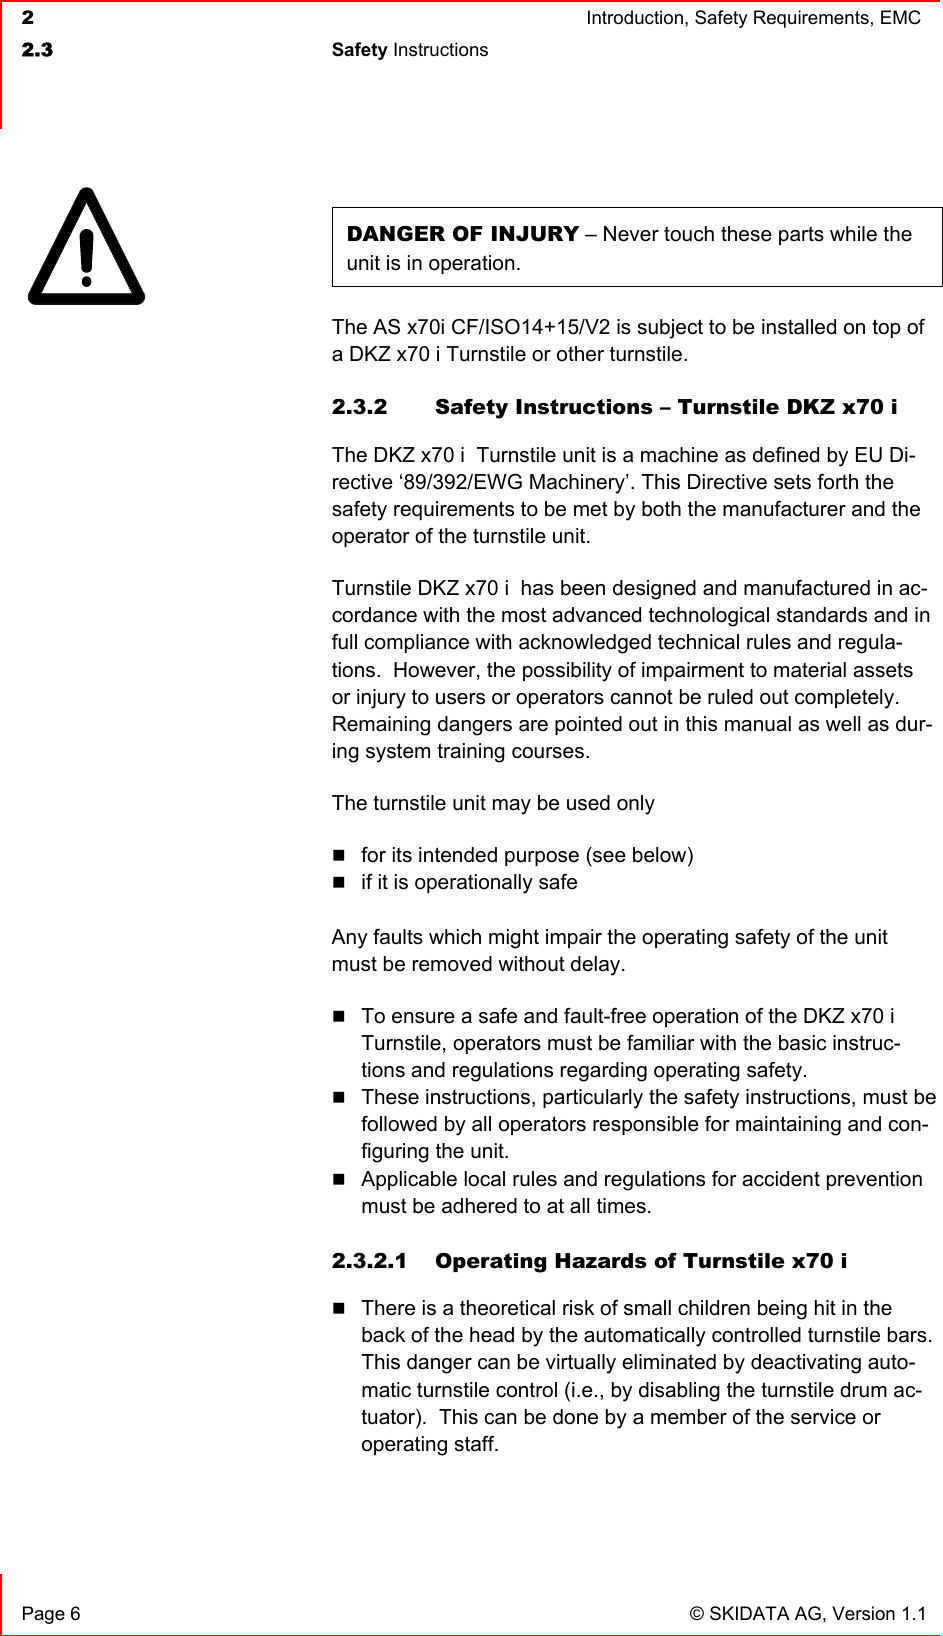  2  Introduction, Safety Requirements, EMC  2.3 Safety Instructions    Page 6  © SKIDATA AG, Version 1.1 DANGER OF INJURY – Never touch these parts while the unit is in operation. The AS x70i CF/ISO14+15/V2 is subject to be installed on top of a DKZ x70 i Turnstile or other turnstile. 2.3.2  Safety Instructions – Turnstile DKZ x70 i  The DKZ x70 i  Turnstile unit is a machine as defined by EU Di-rective ‘89/392/EWG Machinery’. This Directive sets forth the safety requirements to be met by both the manufacturer and the operator of the turnstile unit. Turnstile DKZ x70 i  has been designed and manufactured in ac-cordance with the most advanced technological standards and in full compliance with acknowledged technical rules and regula-tions.  However, the possibility of impairment to material assets or injury to users or operators cannot be ruled out completely.  Remaining dangers are pointed out in this manual as well as dur-ing system training courses. The turnstile unit may be used only  for its intended purpose (see below)  if it is operationally safe  Any faults which might impair the operating safety of the unit must be removed without delay.  To ensure a safe and fault-free operation of the DKZ x70 i  Turnstile, operators must be familiar with the basic instruc-tions and regulations regarding operating safety.  These instructions, particularly the safety instructions, must be followed by all operators responsible for maintaining and con-figuring the unit.  Applicable local rules and regulations for accident prevention must be adhered to at all times.  2.3.2.1  Operating Hazards of Turnstile x70 i   There is a theoretical risk of small children being hit in the back of the head by the automatically controlled turnstile bars. This danger can be virtually eliminated by deactivating auto-matic turnstile control (i.e., by disabling the turnstile drum ac-tuator).  This can be done by a member of the service or operating staff.  